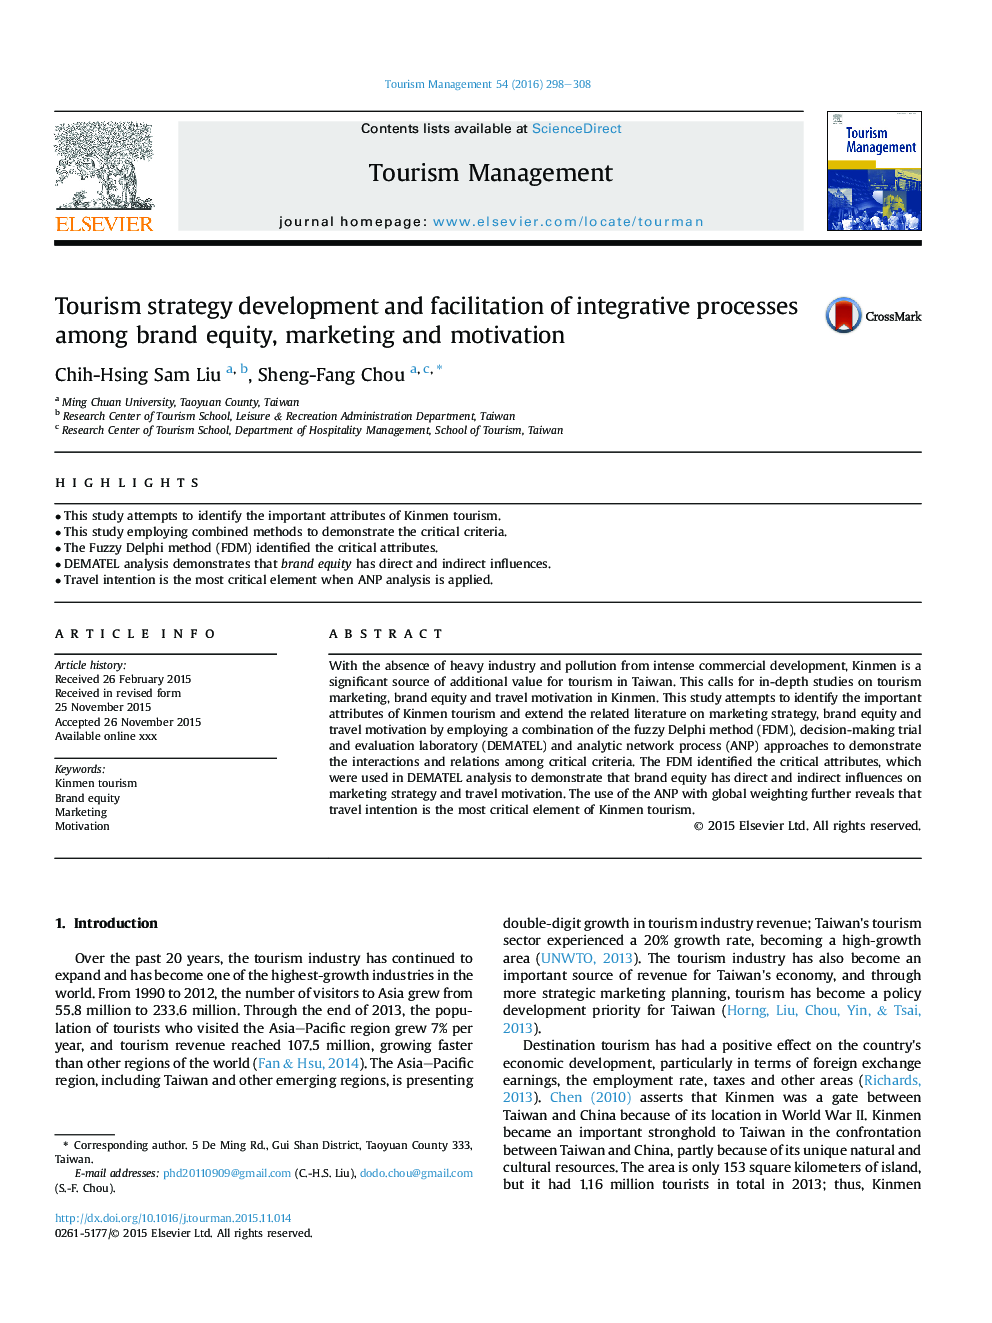 Tourism strategy development and facilitation of integrative processes among brand equity, marketing and motivation